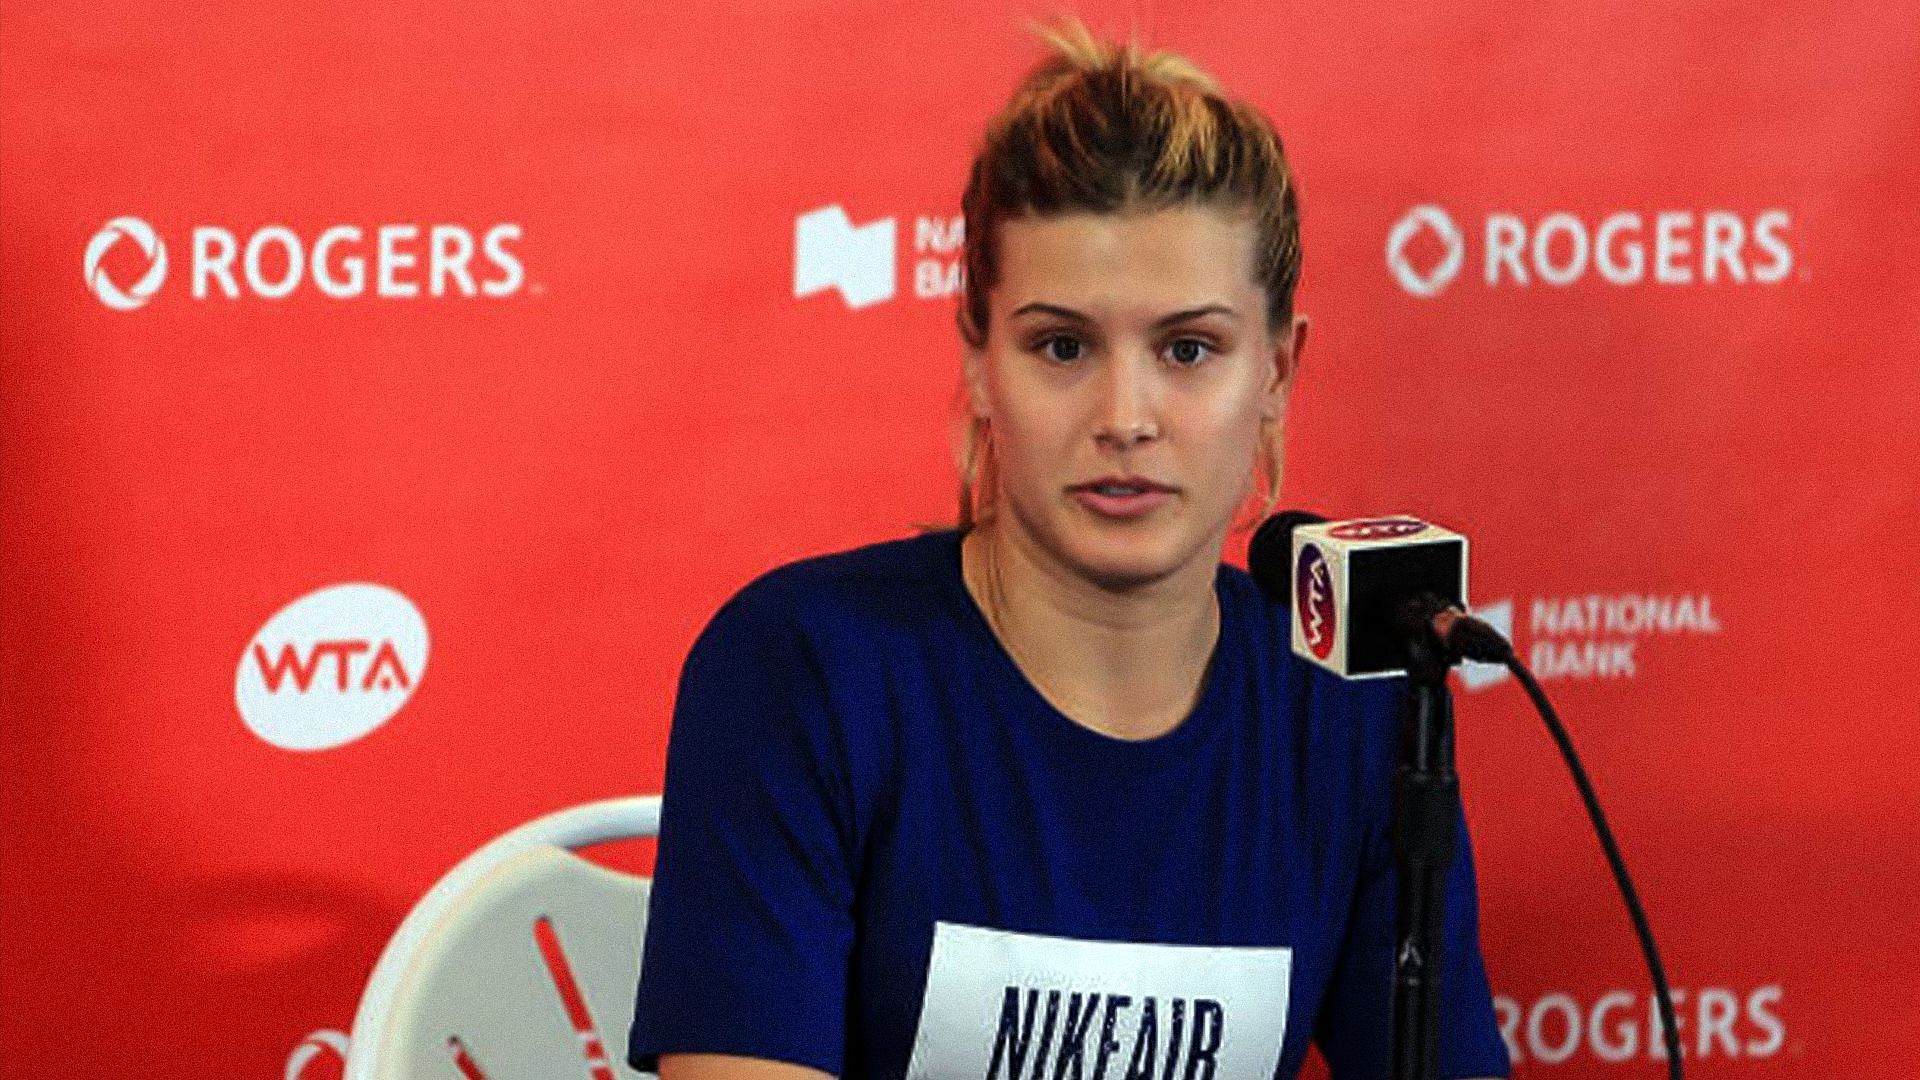 3 female tennis players who have called attention to difficulties women face playing through their periods pain ft. Eugenie Bouchard